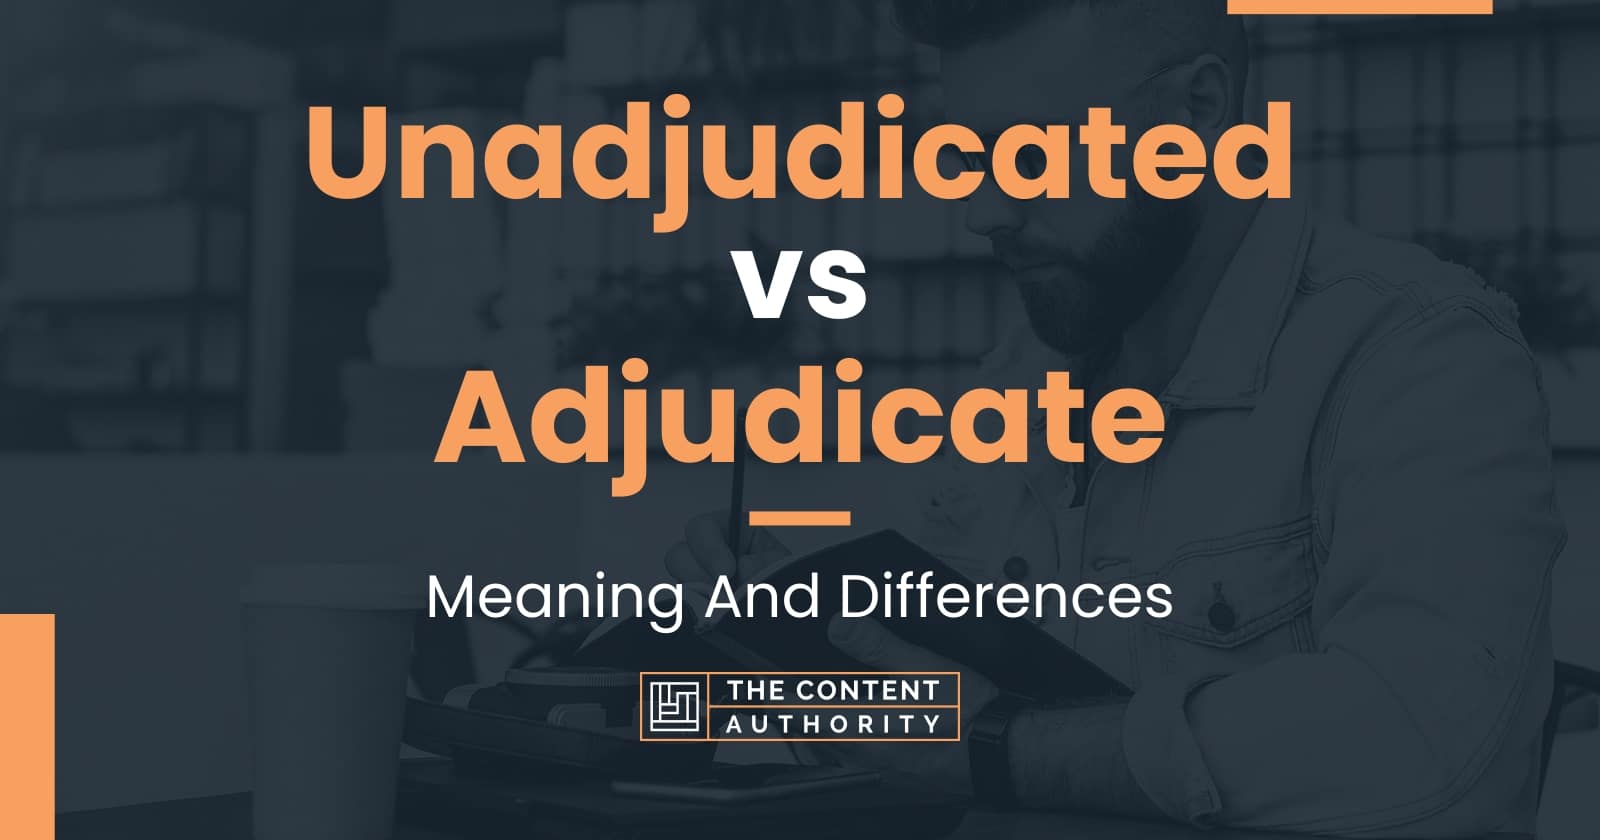 Unadjudicated vs Adjudicate: Meaning And Differences